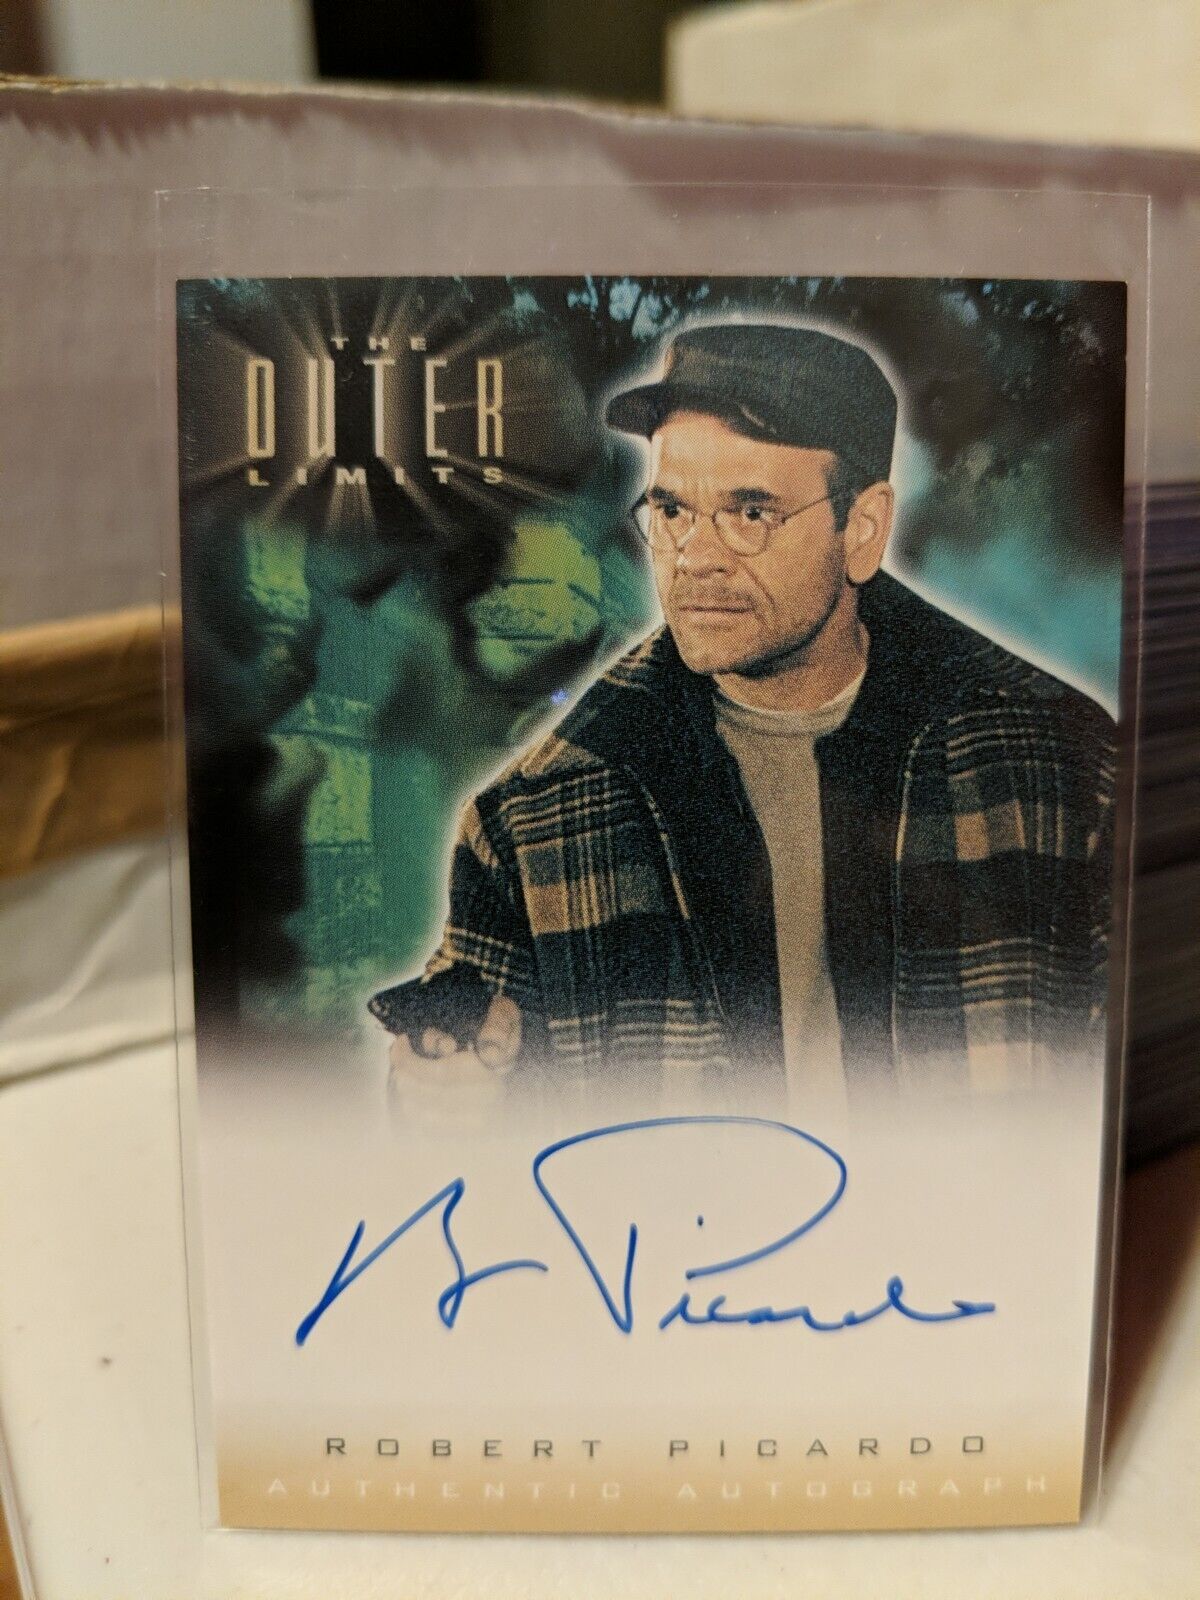 2003 The Outer Limits Robert Picardo A8 Autograph Card as *Emmet Harley* NM 